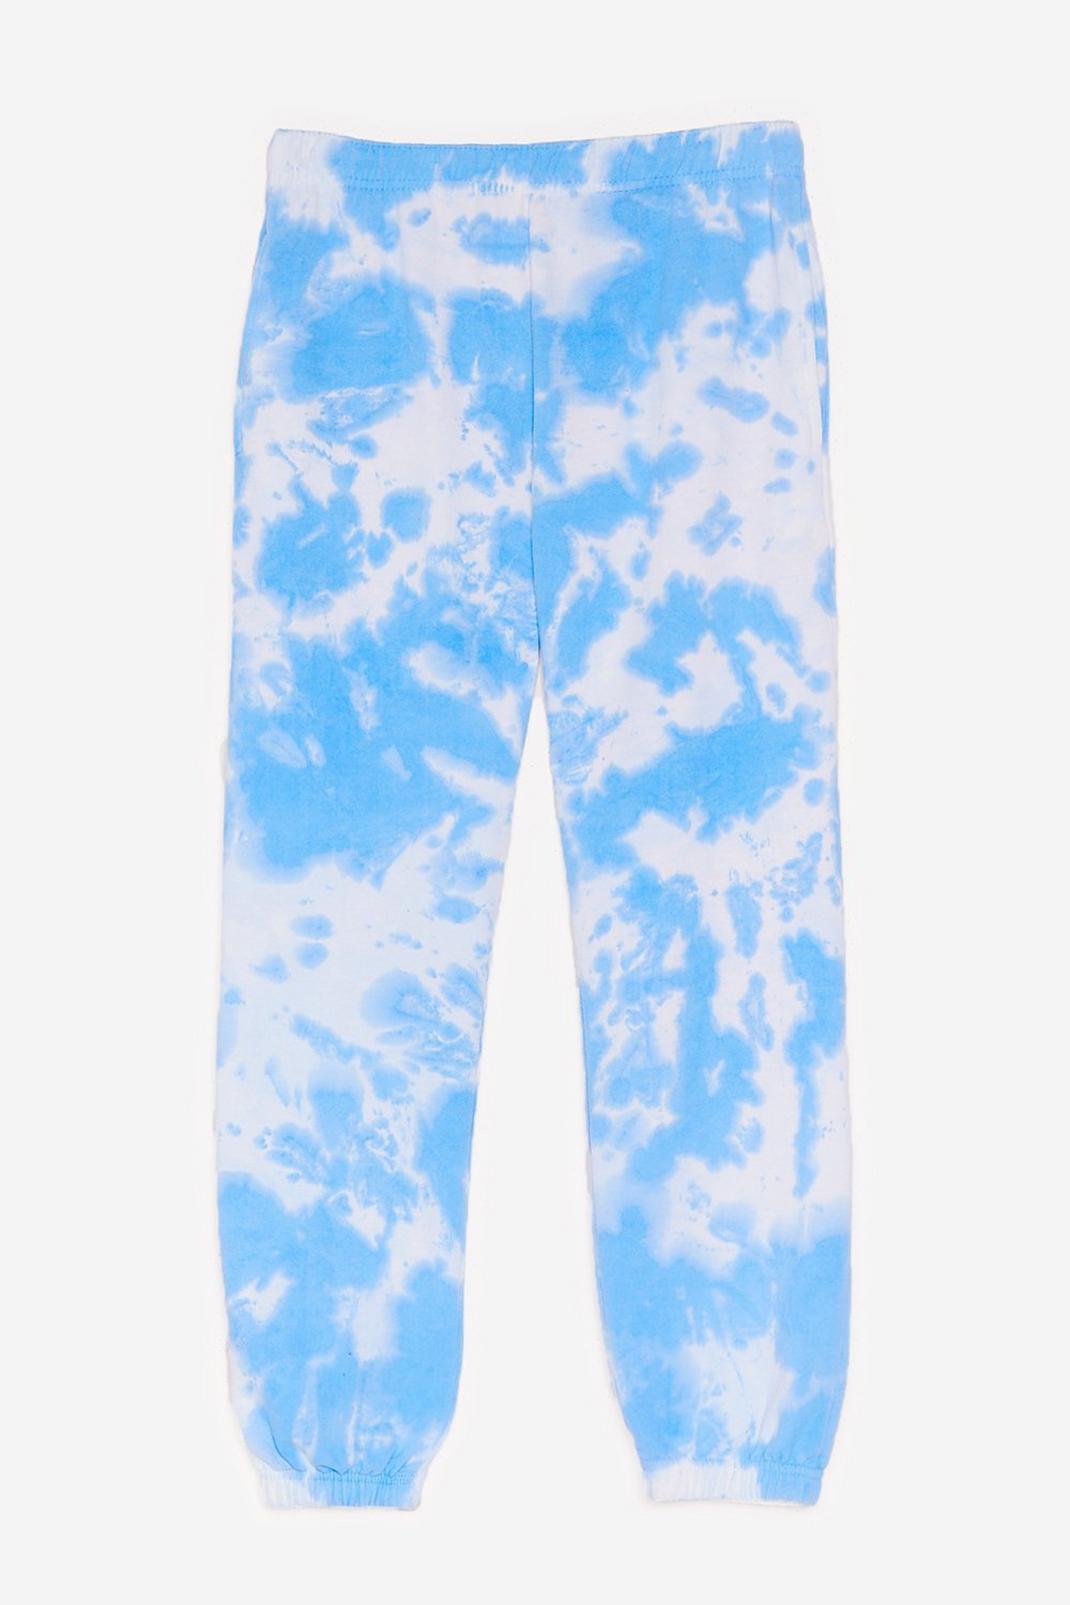 Blue Tie Dye Slouchy High Waisted Sweatpants image number 1